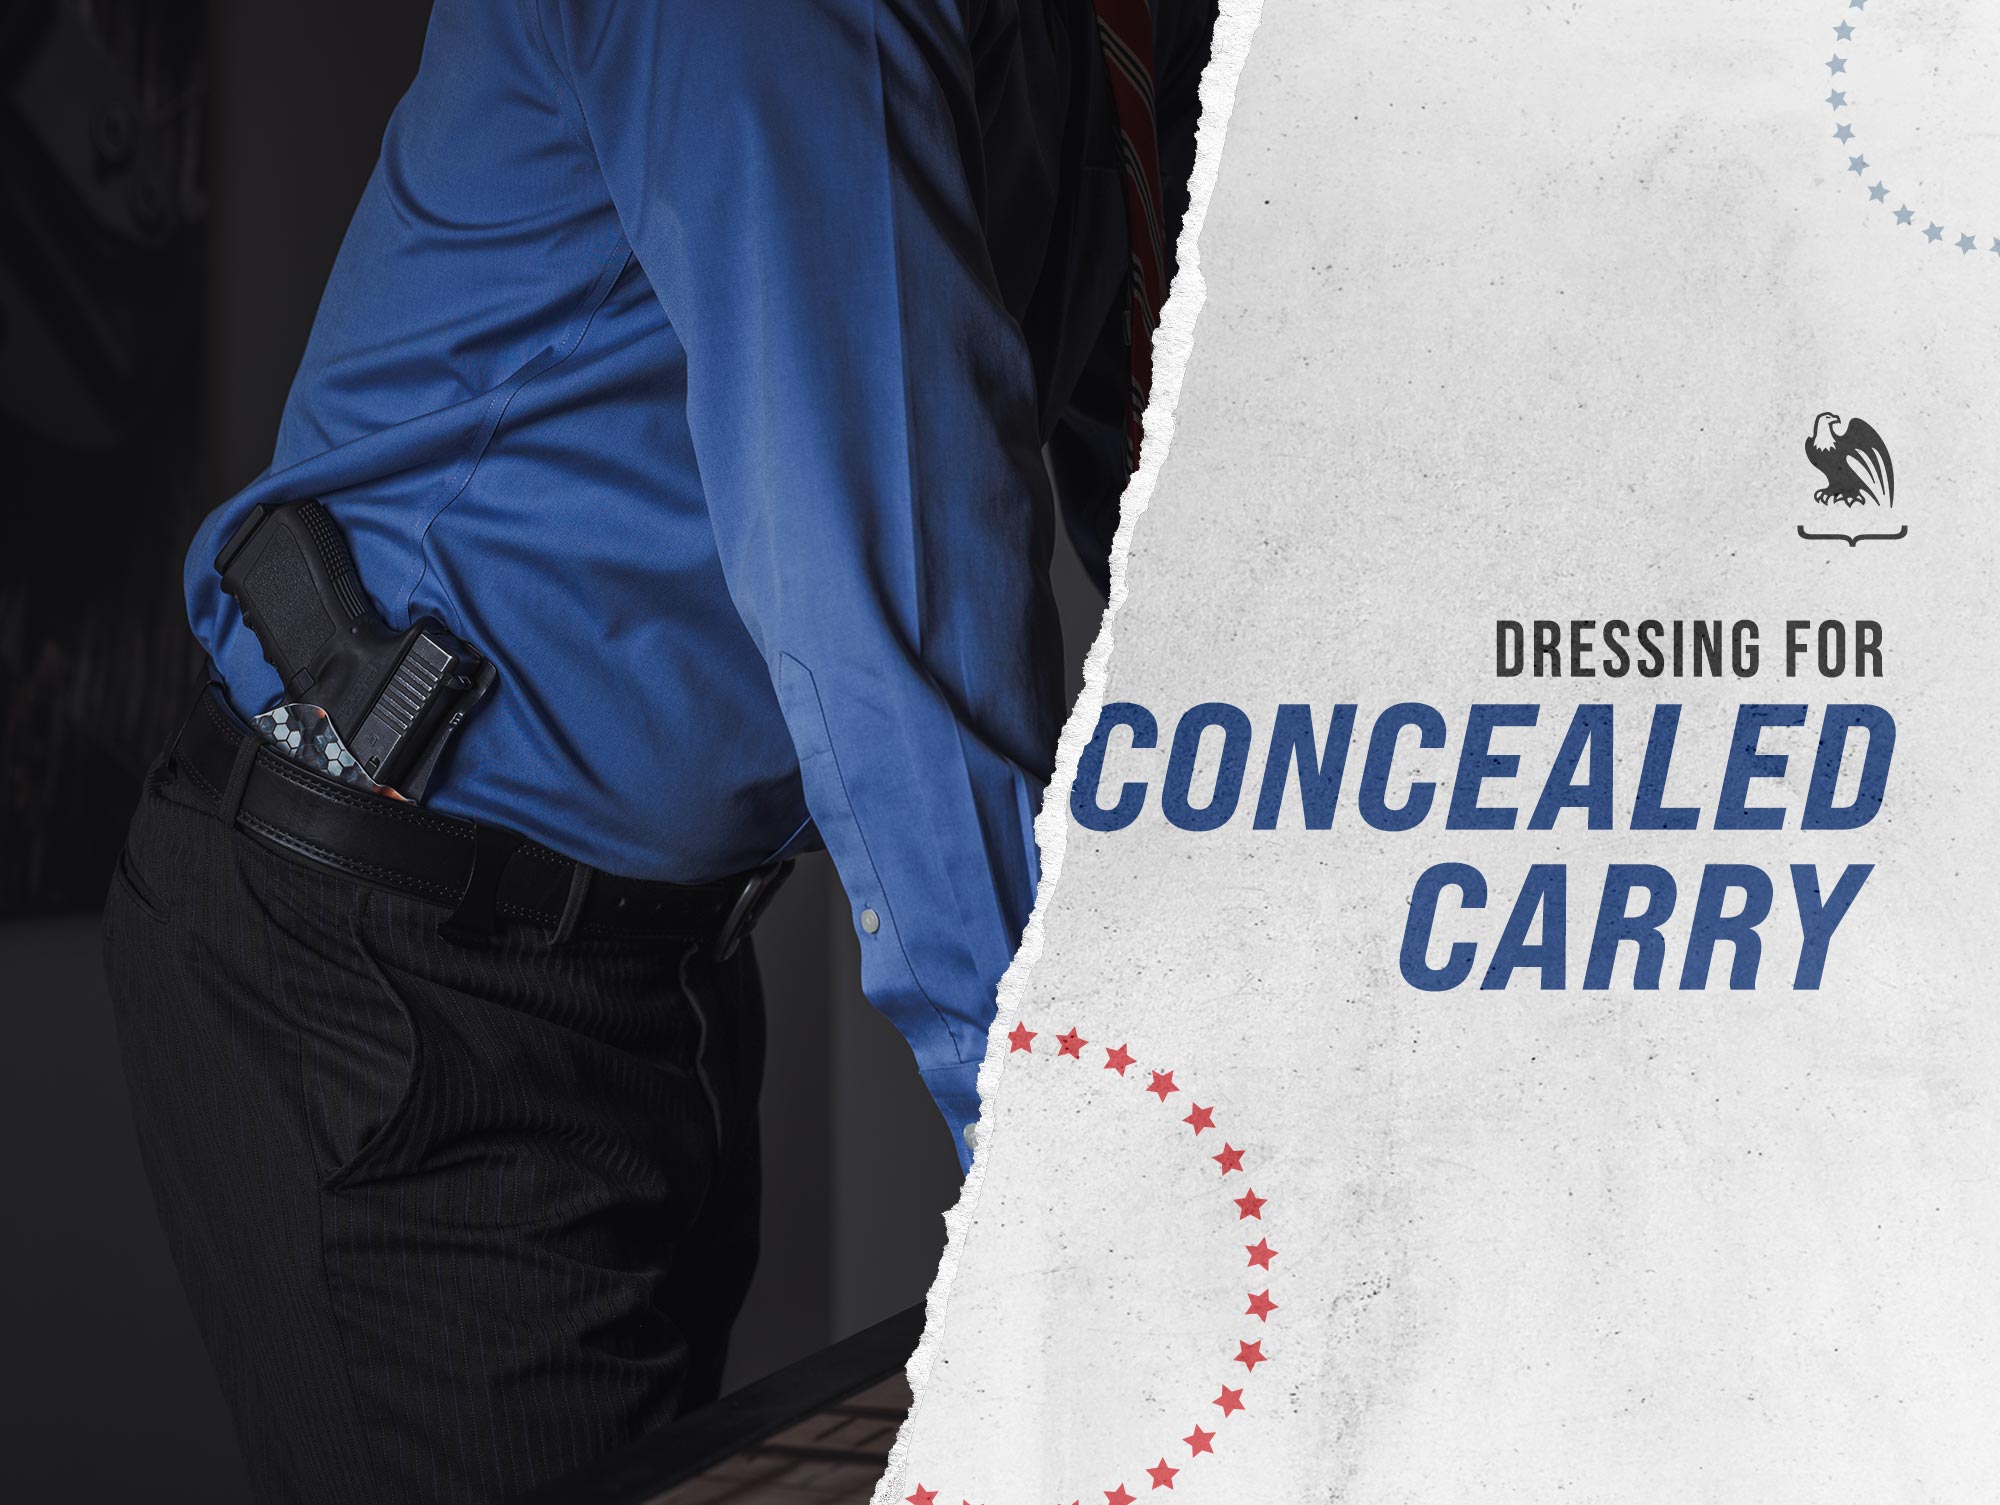 New fashion option for concealed weapon carriers